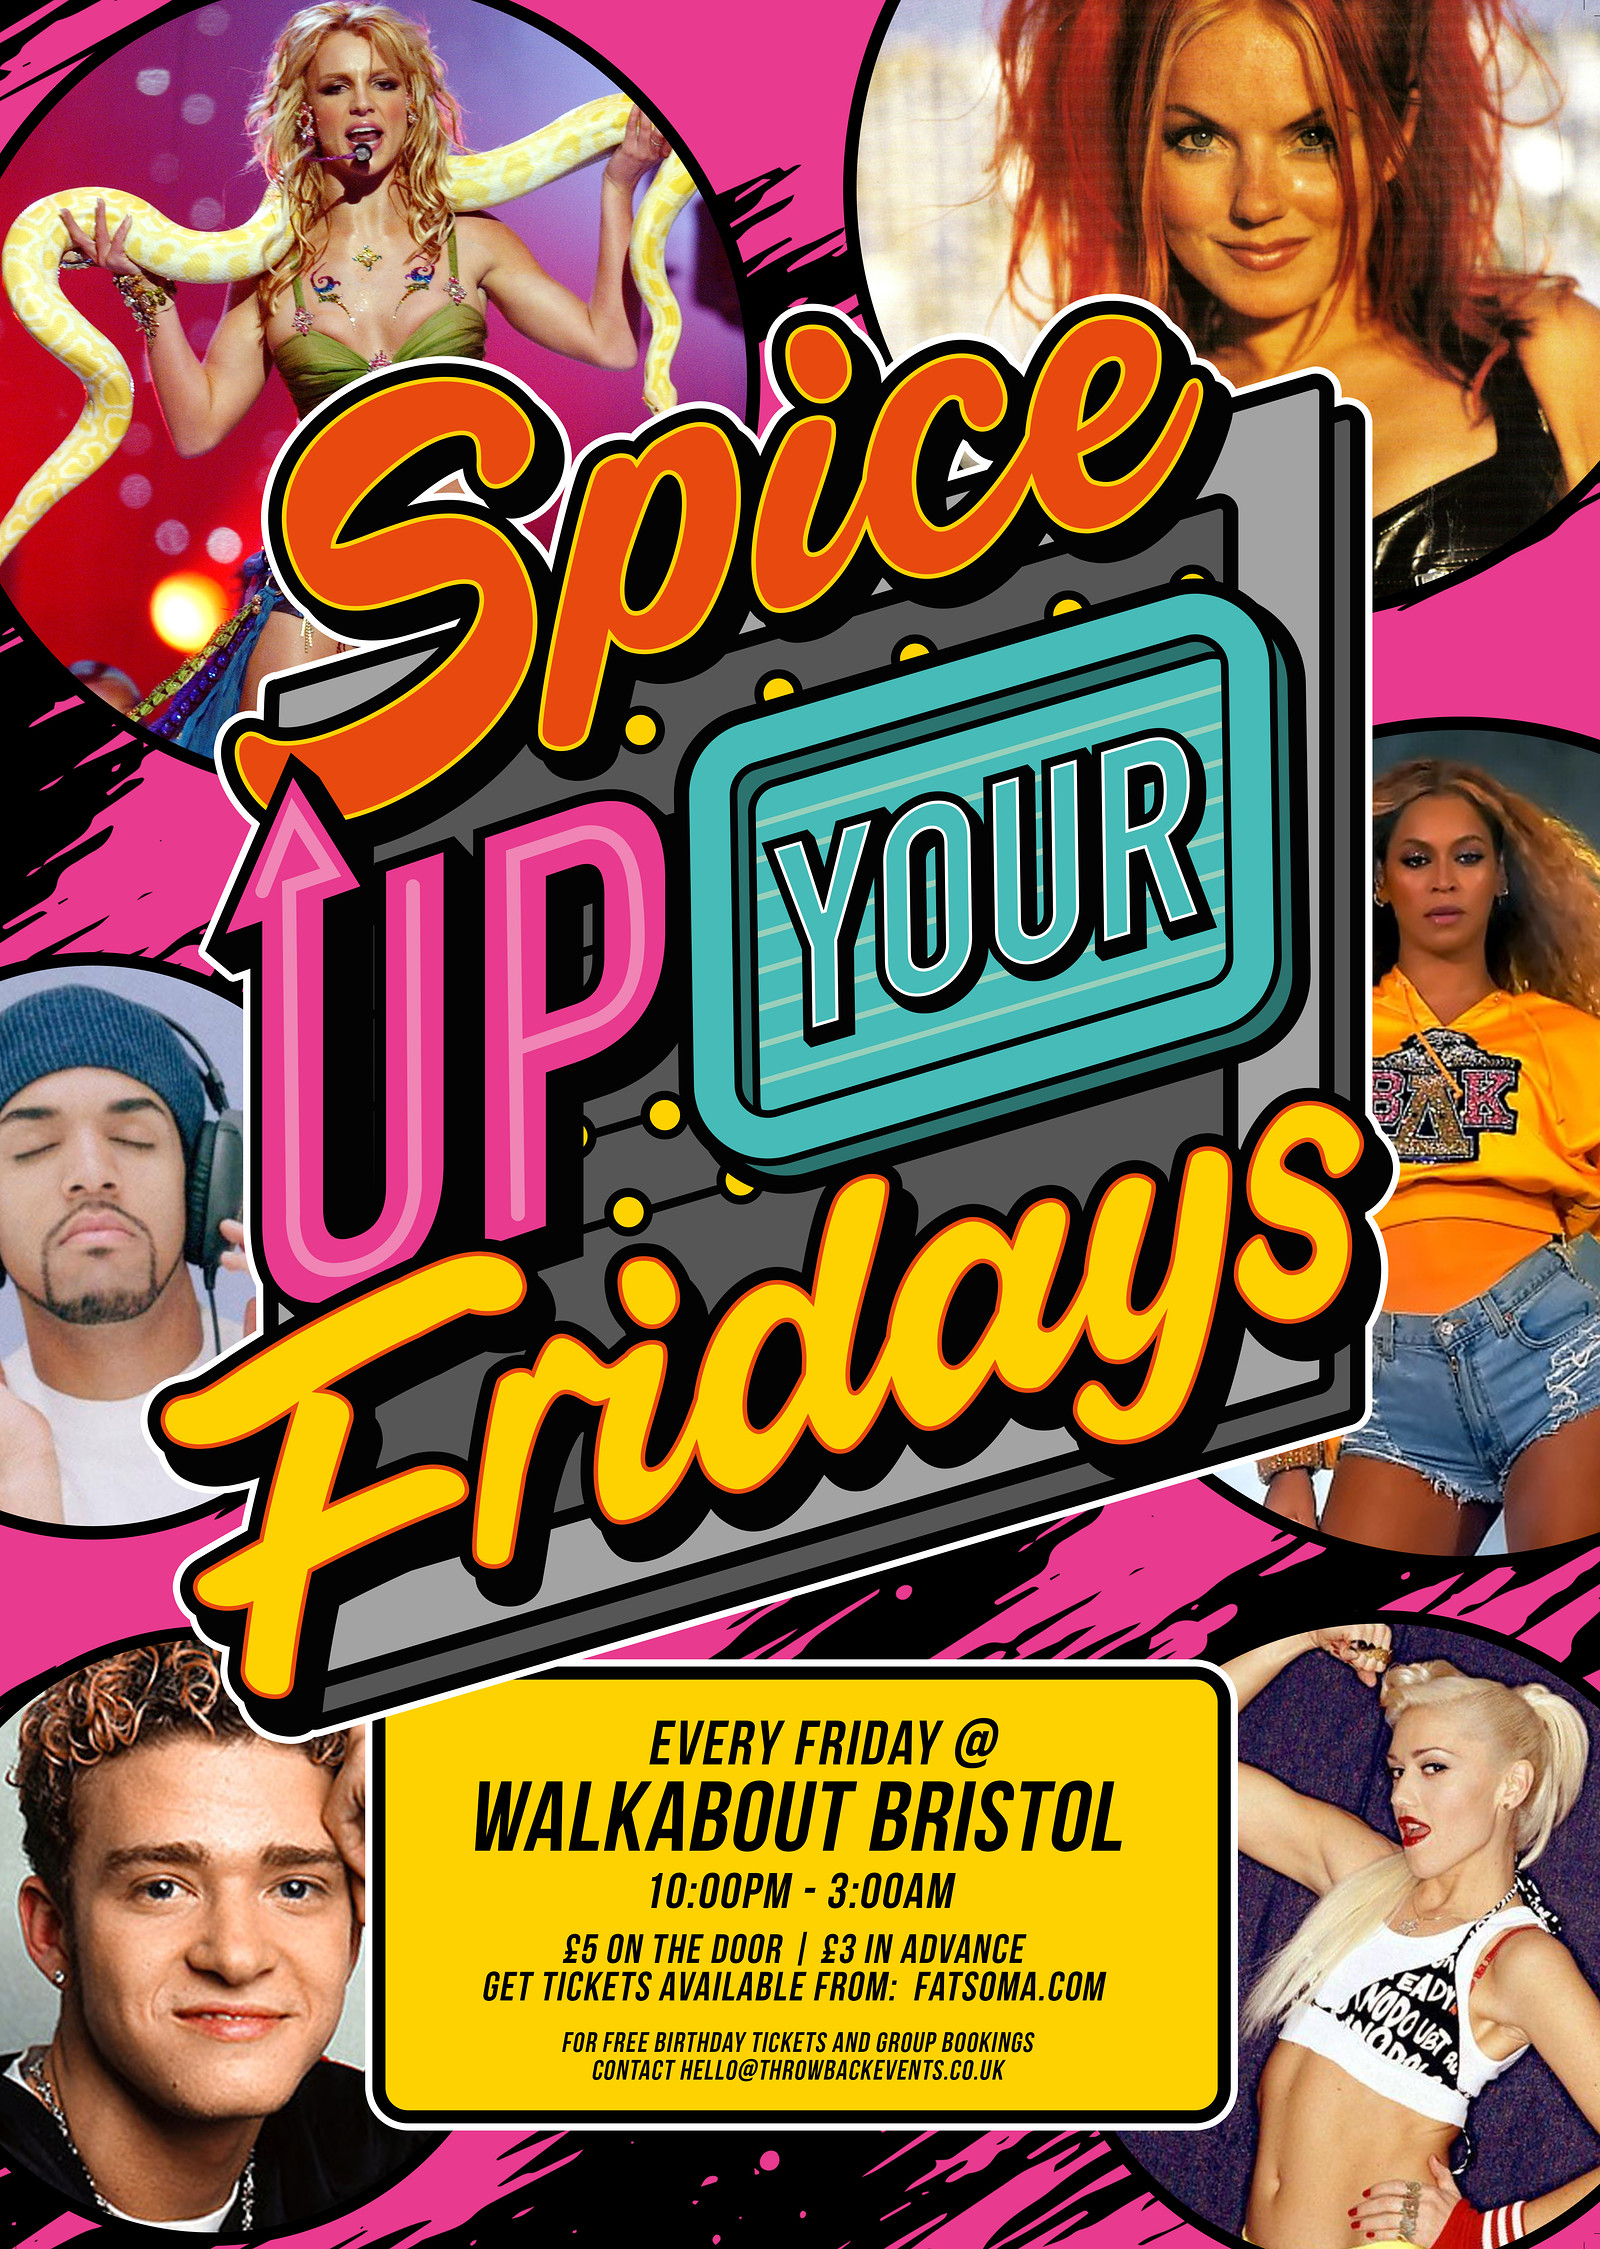 Spice Up Your Fridays - Every Friday at Walkabout Bristol